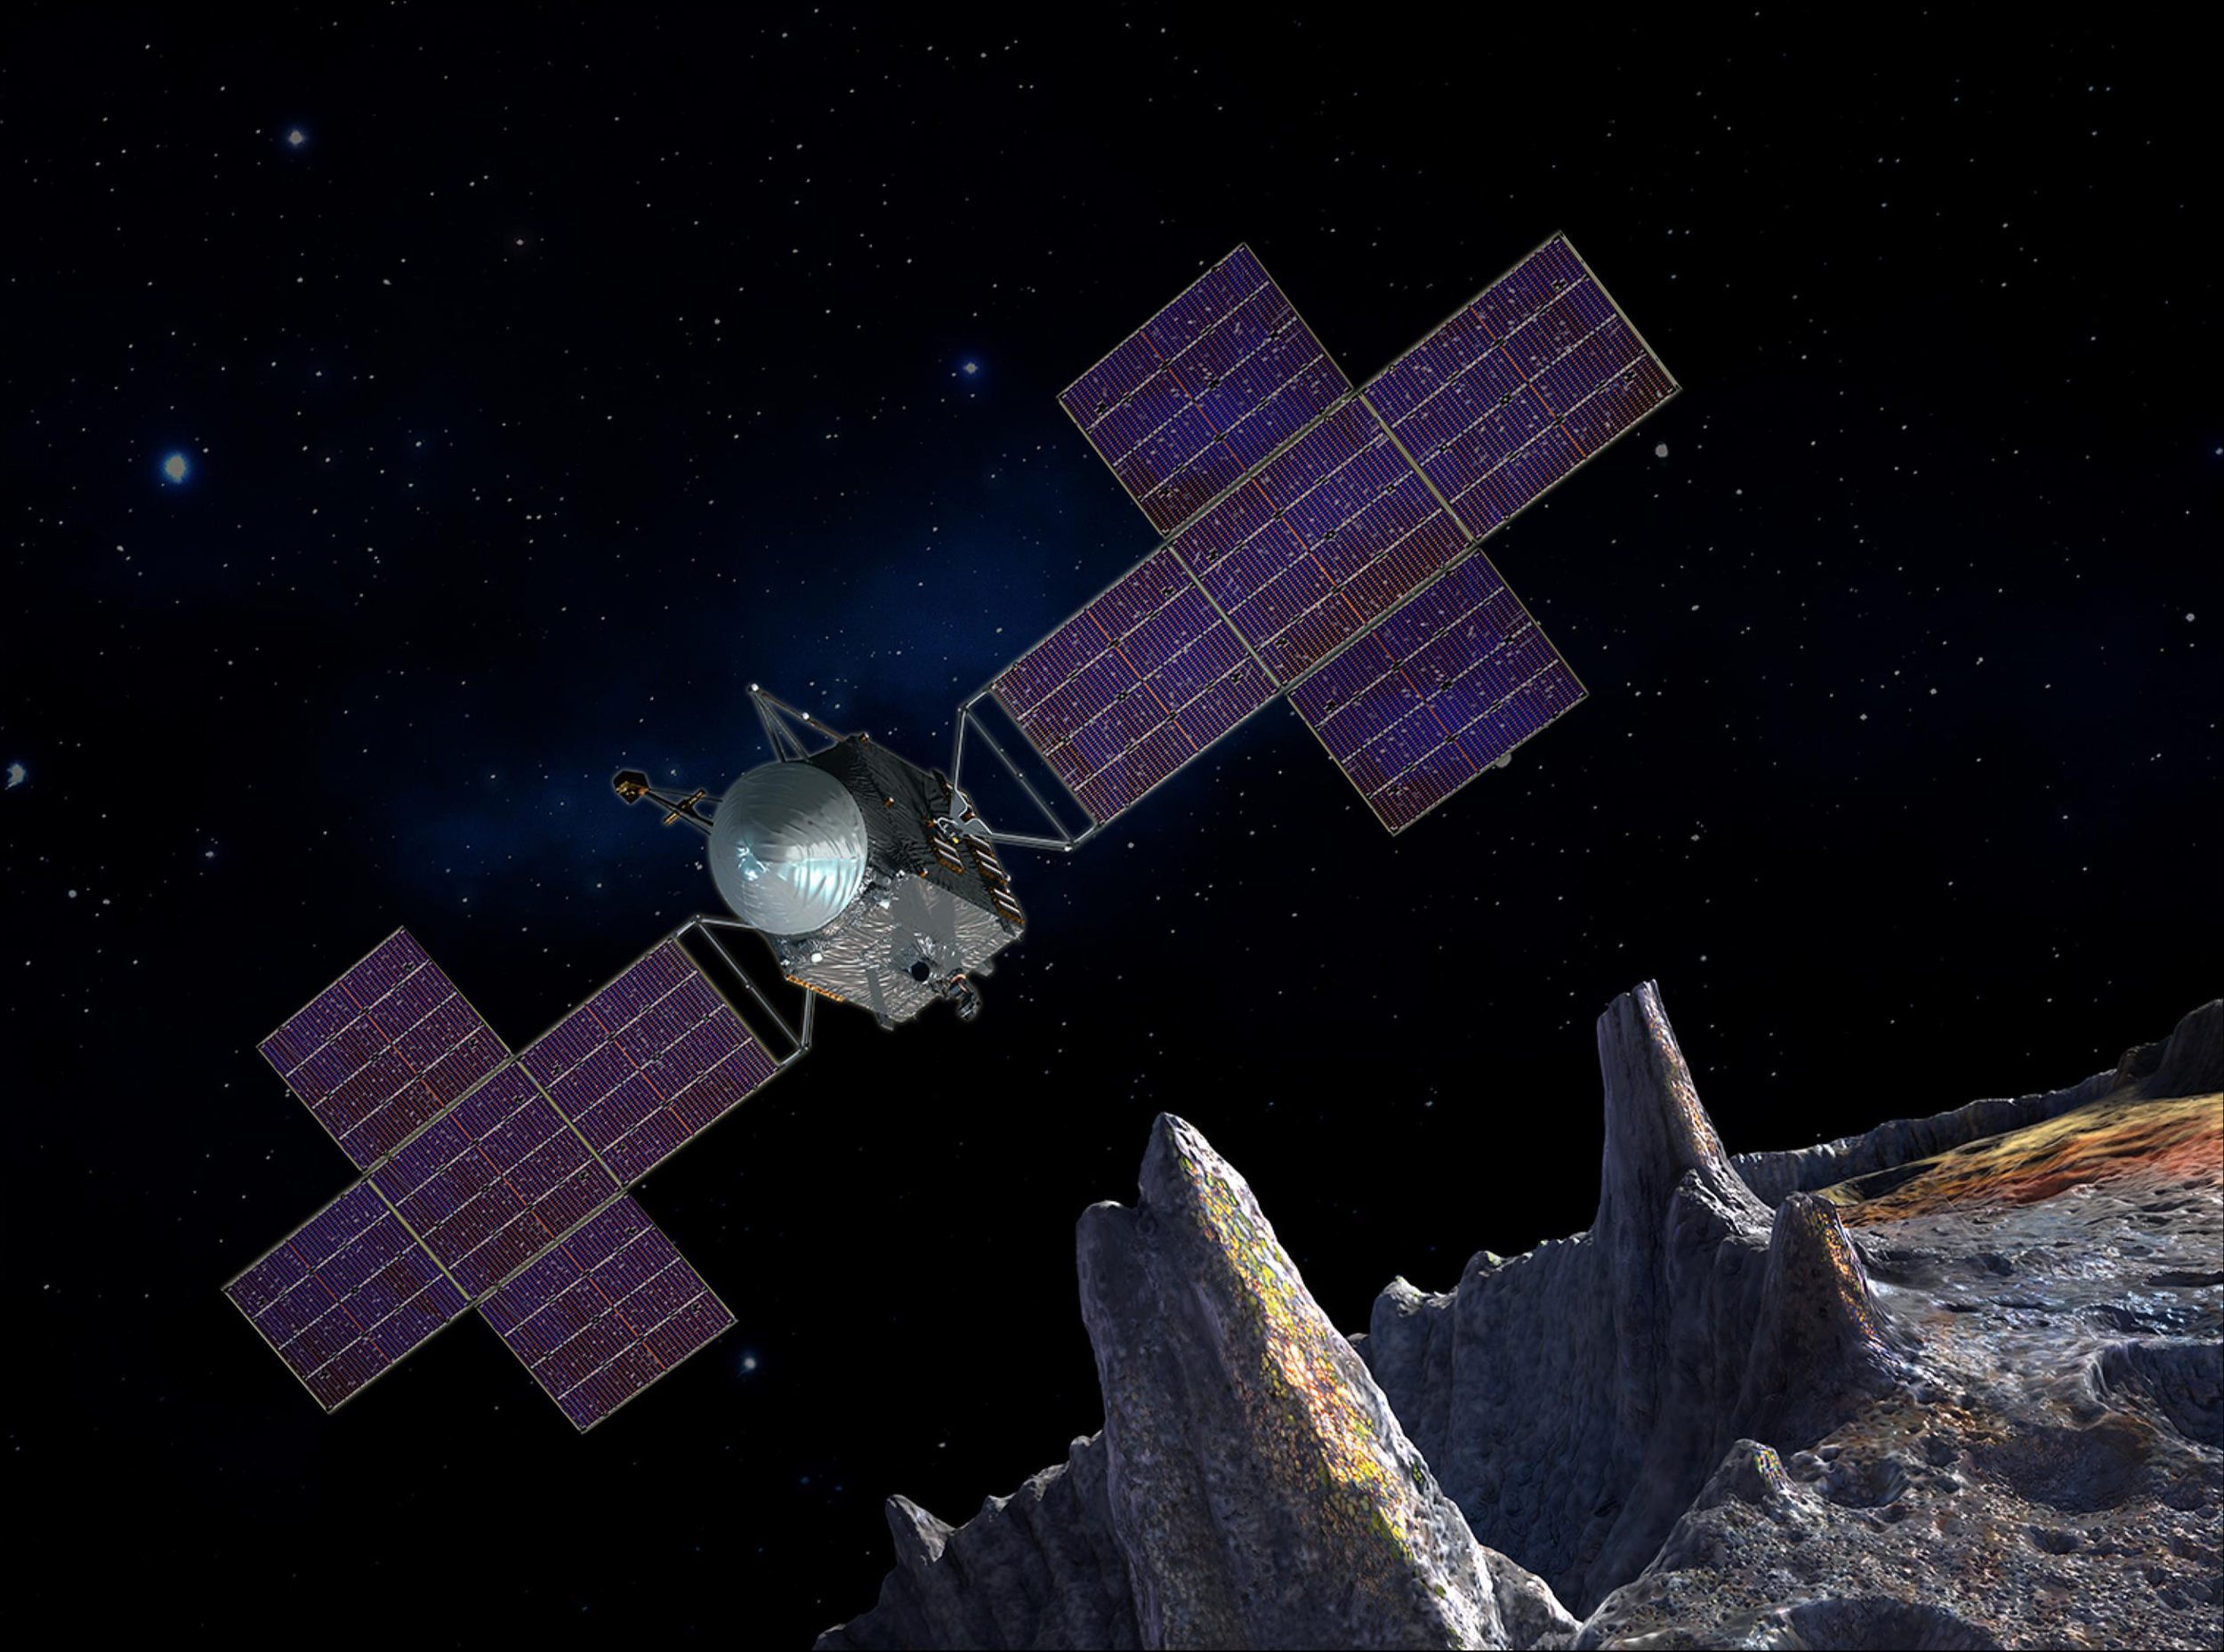 This artist’s rendering shows a blocky space probe, to which a dish antenna is mounted and from which two solar panels extend, in near proximity to rocky, cratered surface.